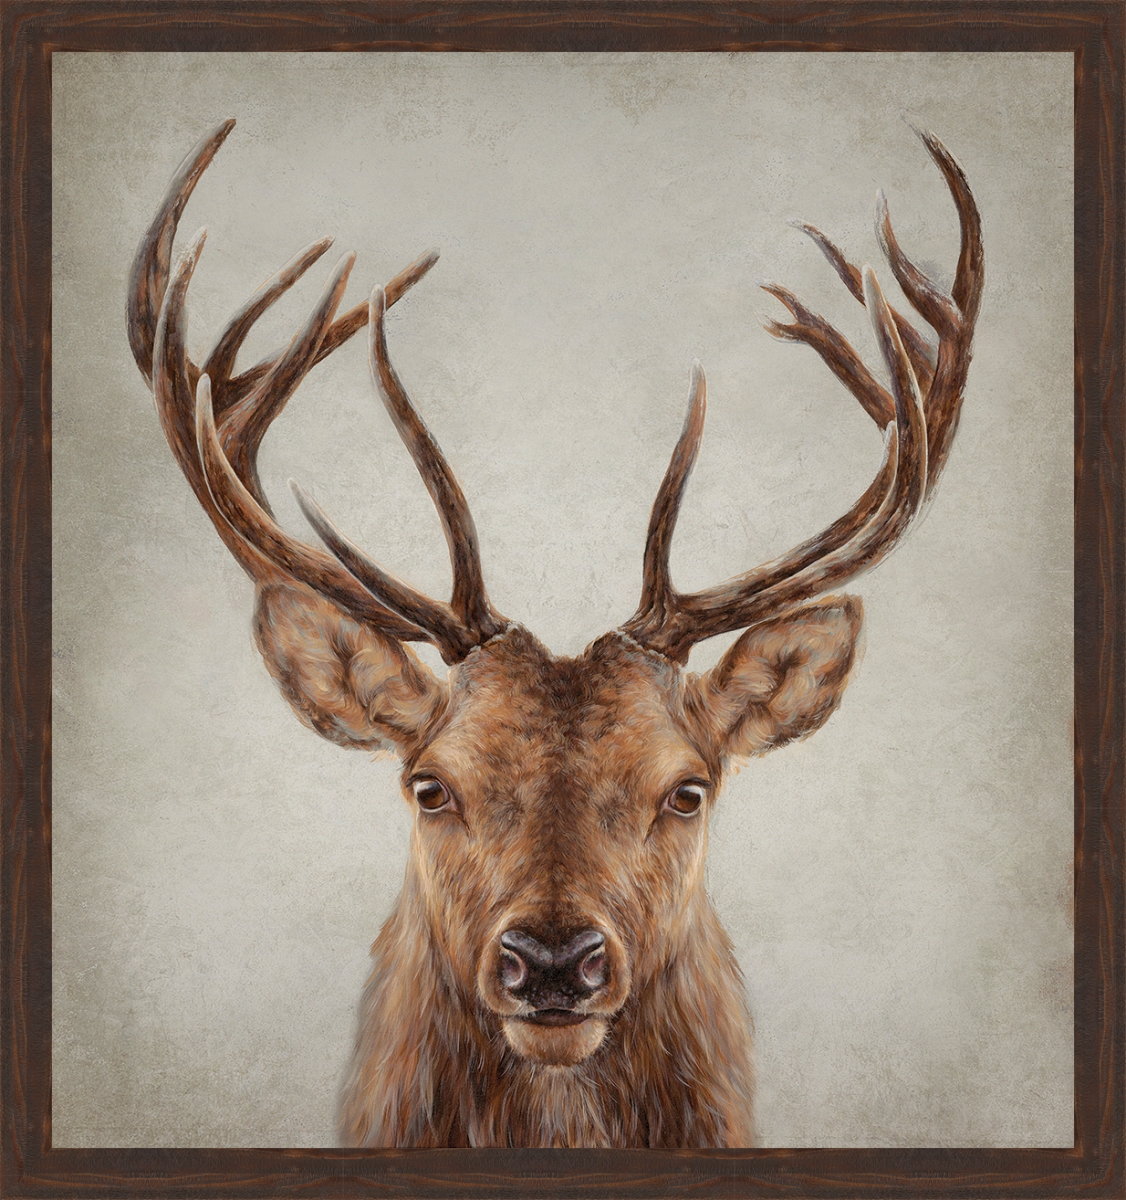 5815 Stag Presence, Framed Giclee Canvas Art - Rich Brown, Natural, Rustic Look Wooden